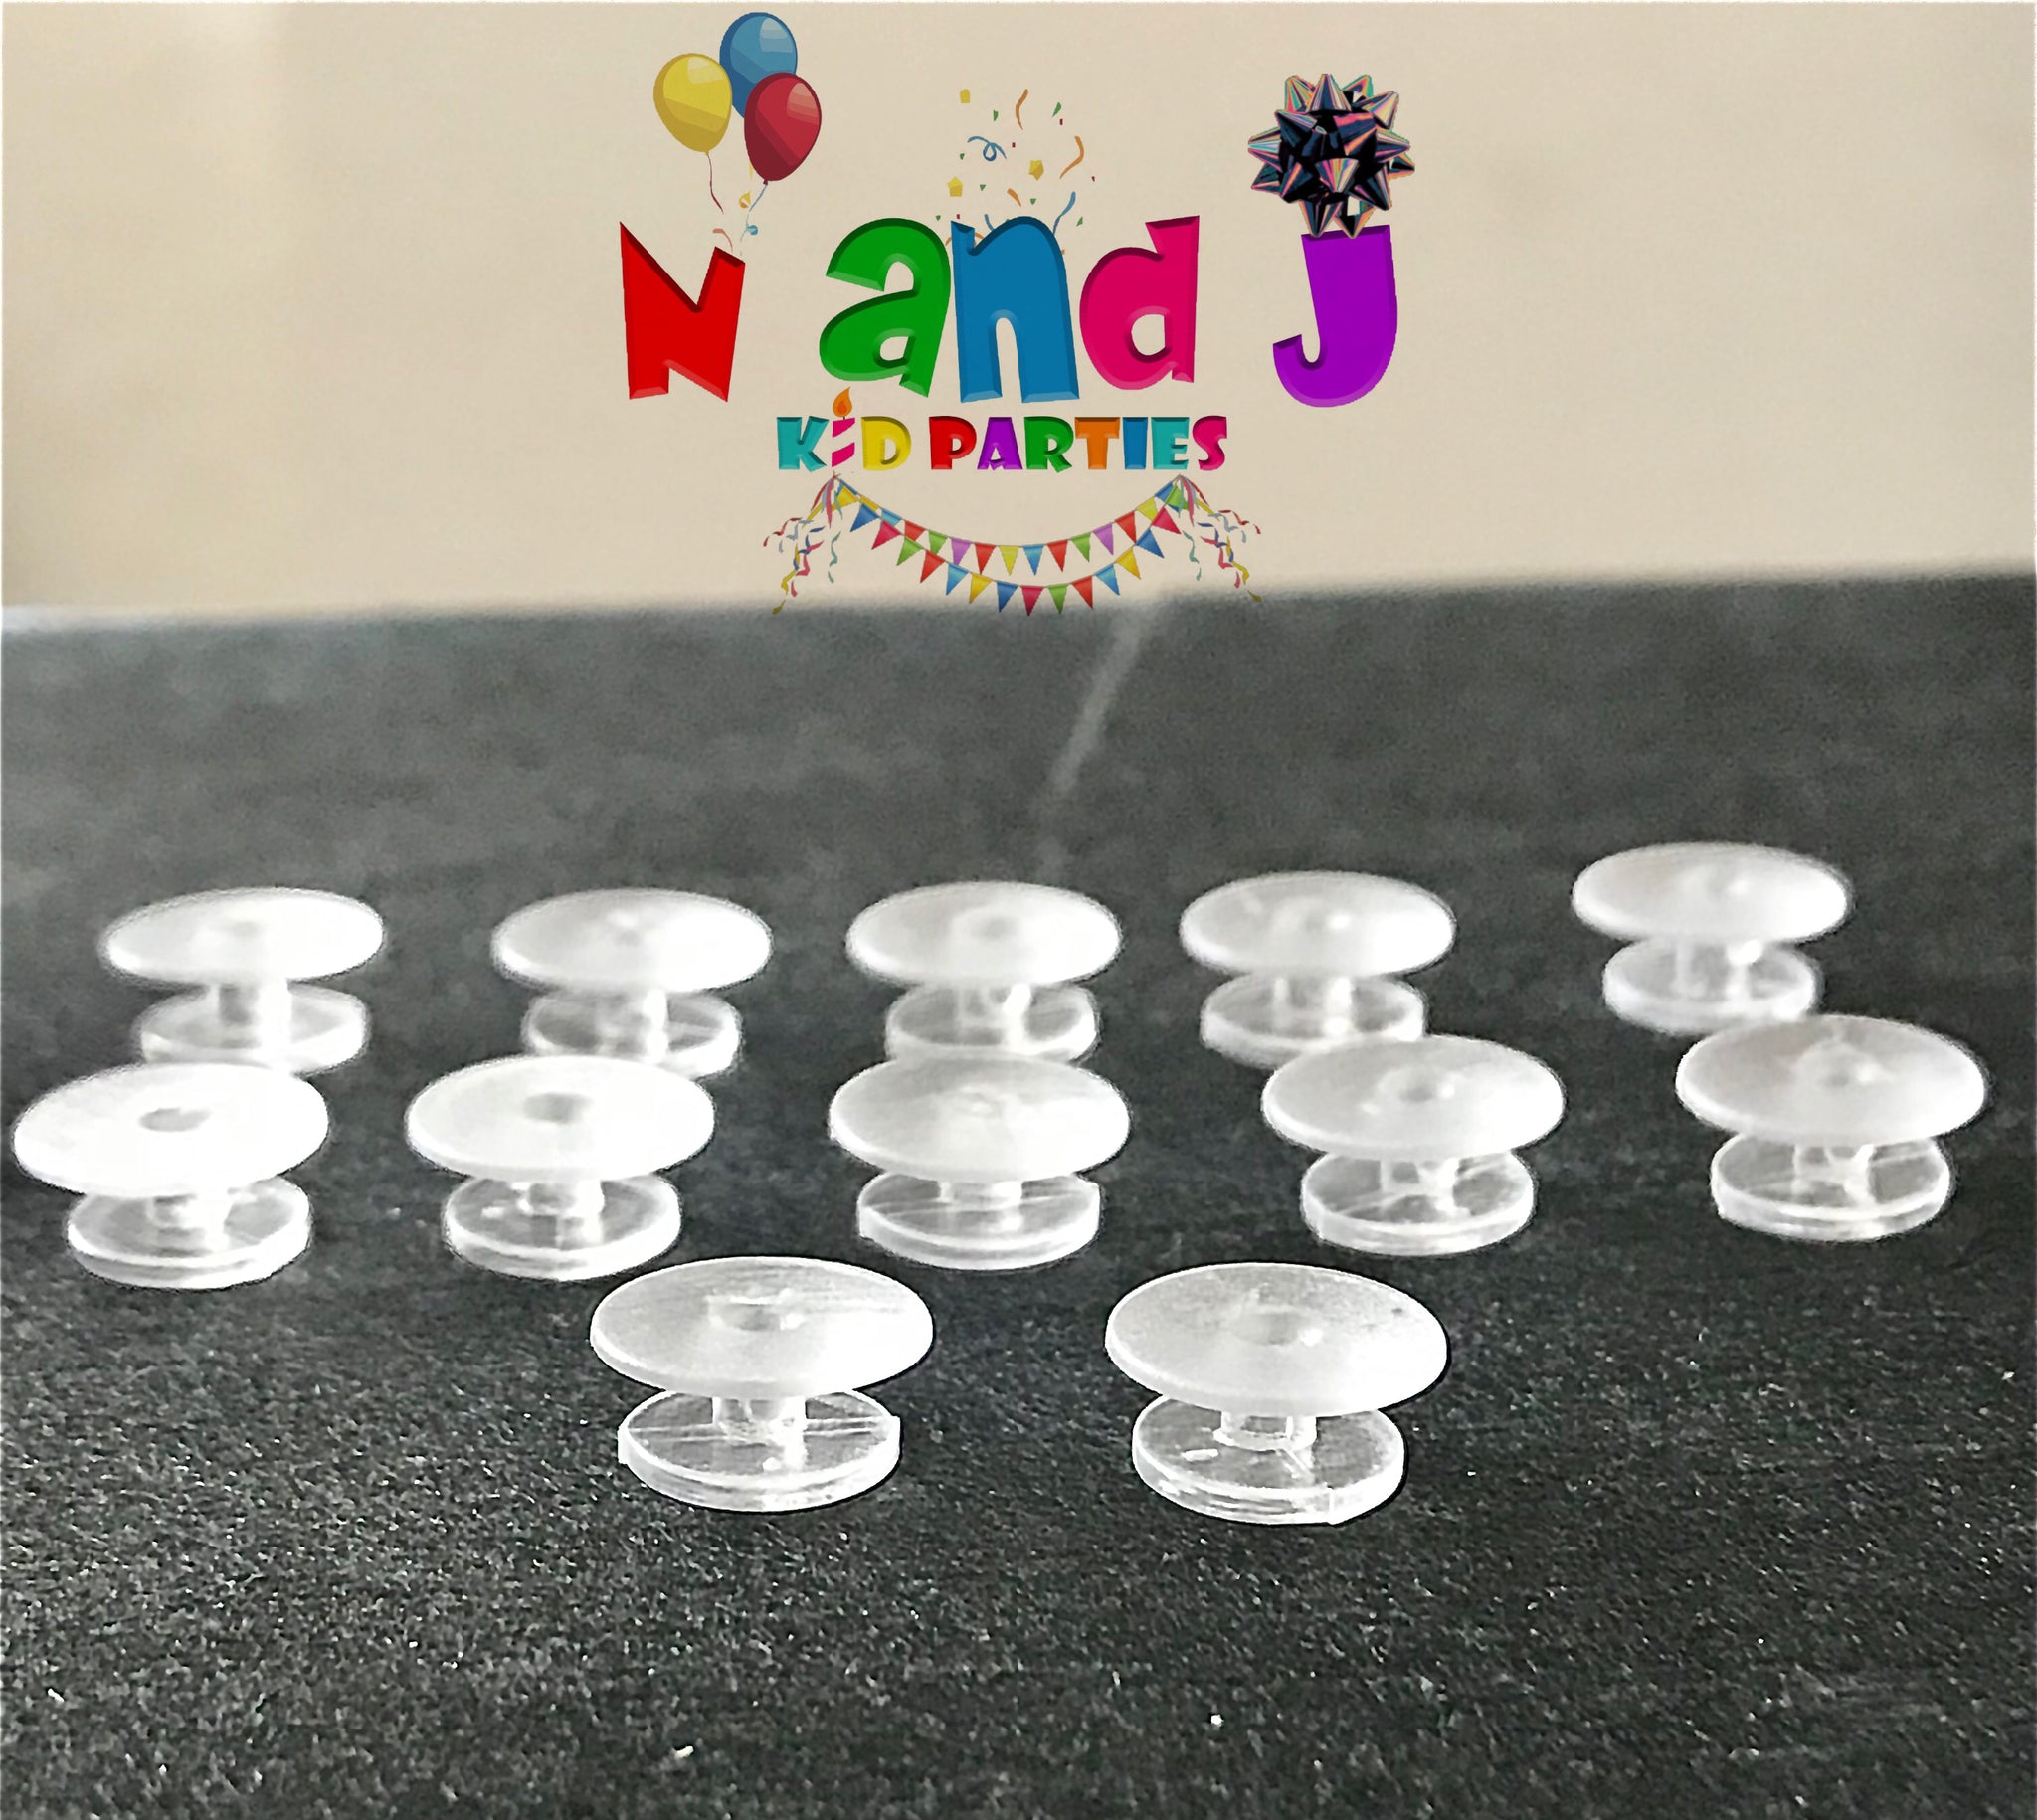 DIY Back Buttons for Croc Shoe Charms or Jibbit Bracelets - Kids Boys Girls  Birthday Party Favors S…